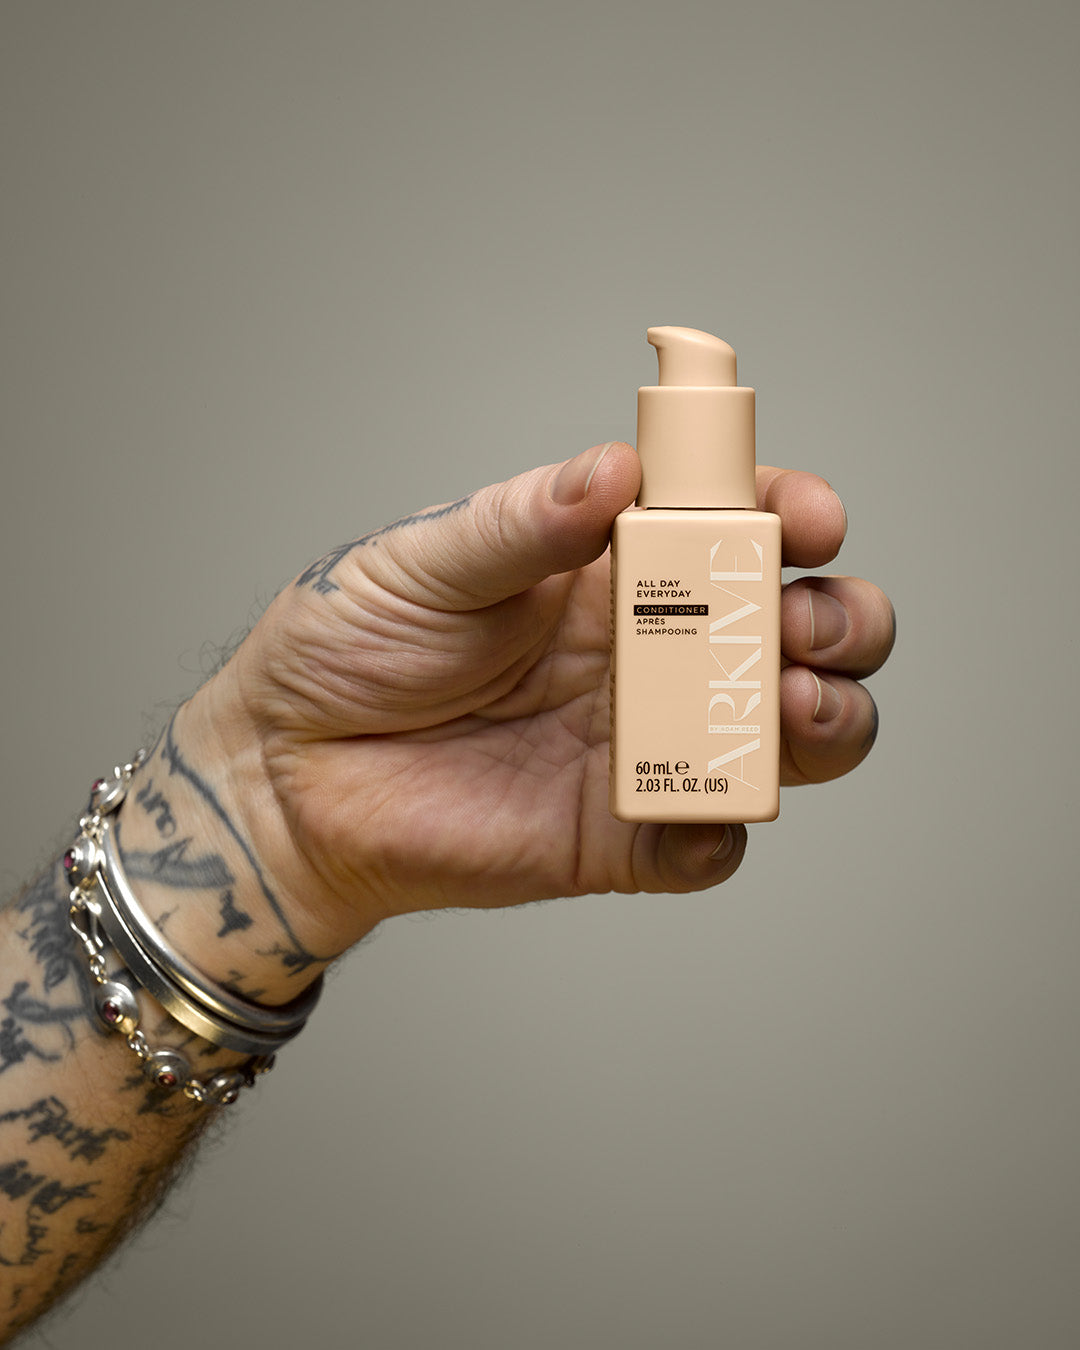 A tattooed hand holding a miniature bottle of Arkive's all day everyday conditioner